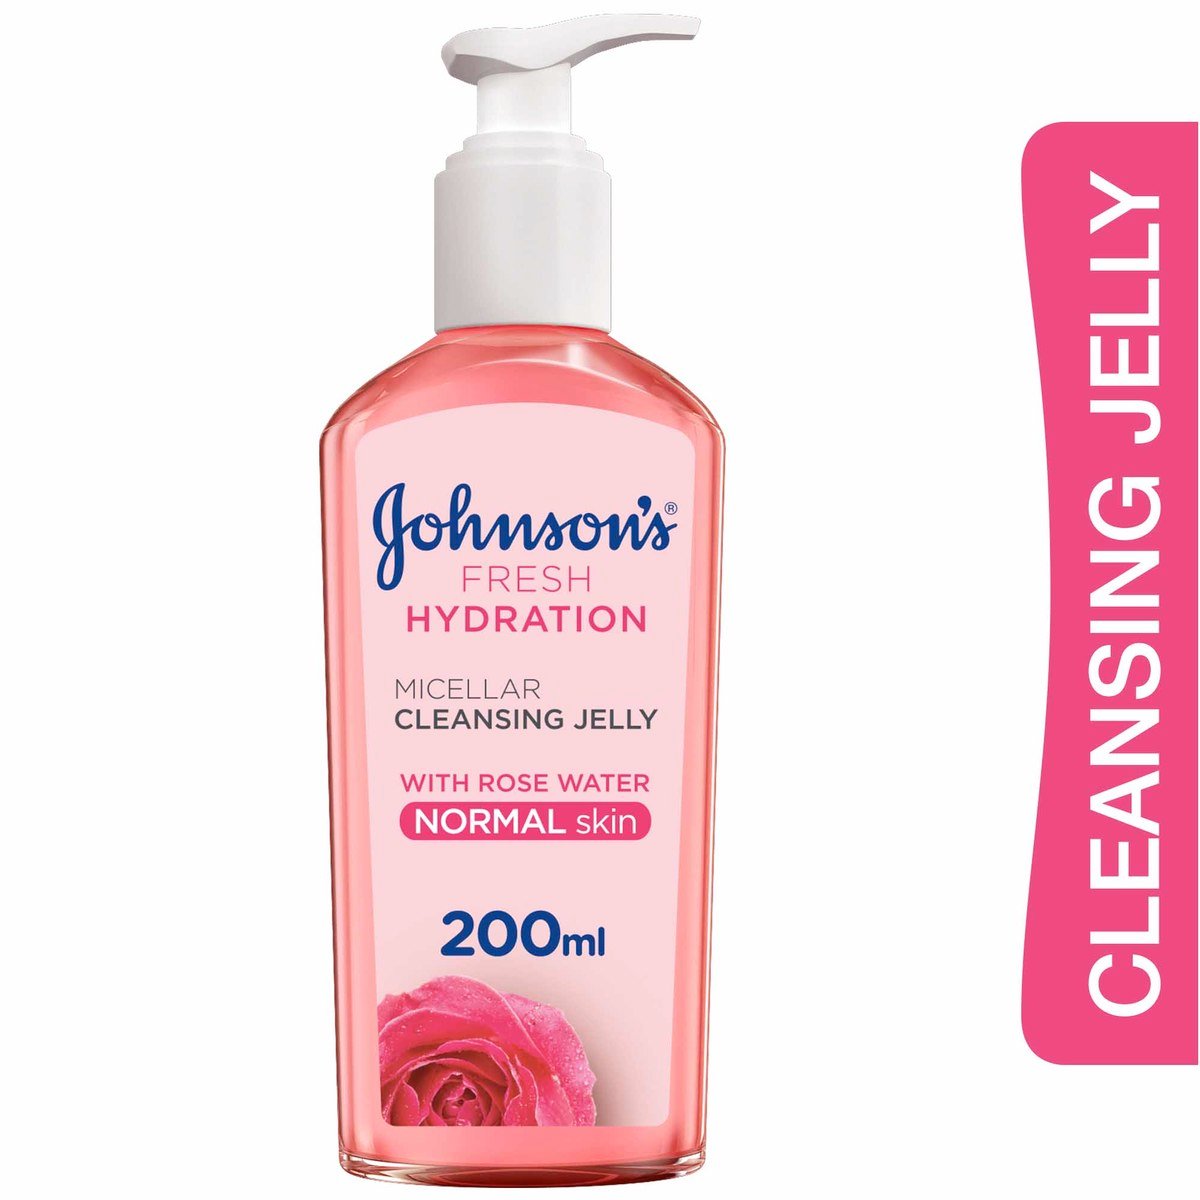 Johnson's Face Cleanser Fresh Hydration Micellar Cleansing Jelly Normal Skin 200 ml